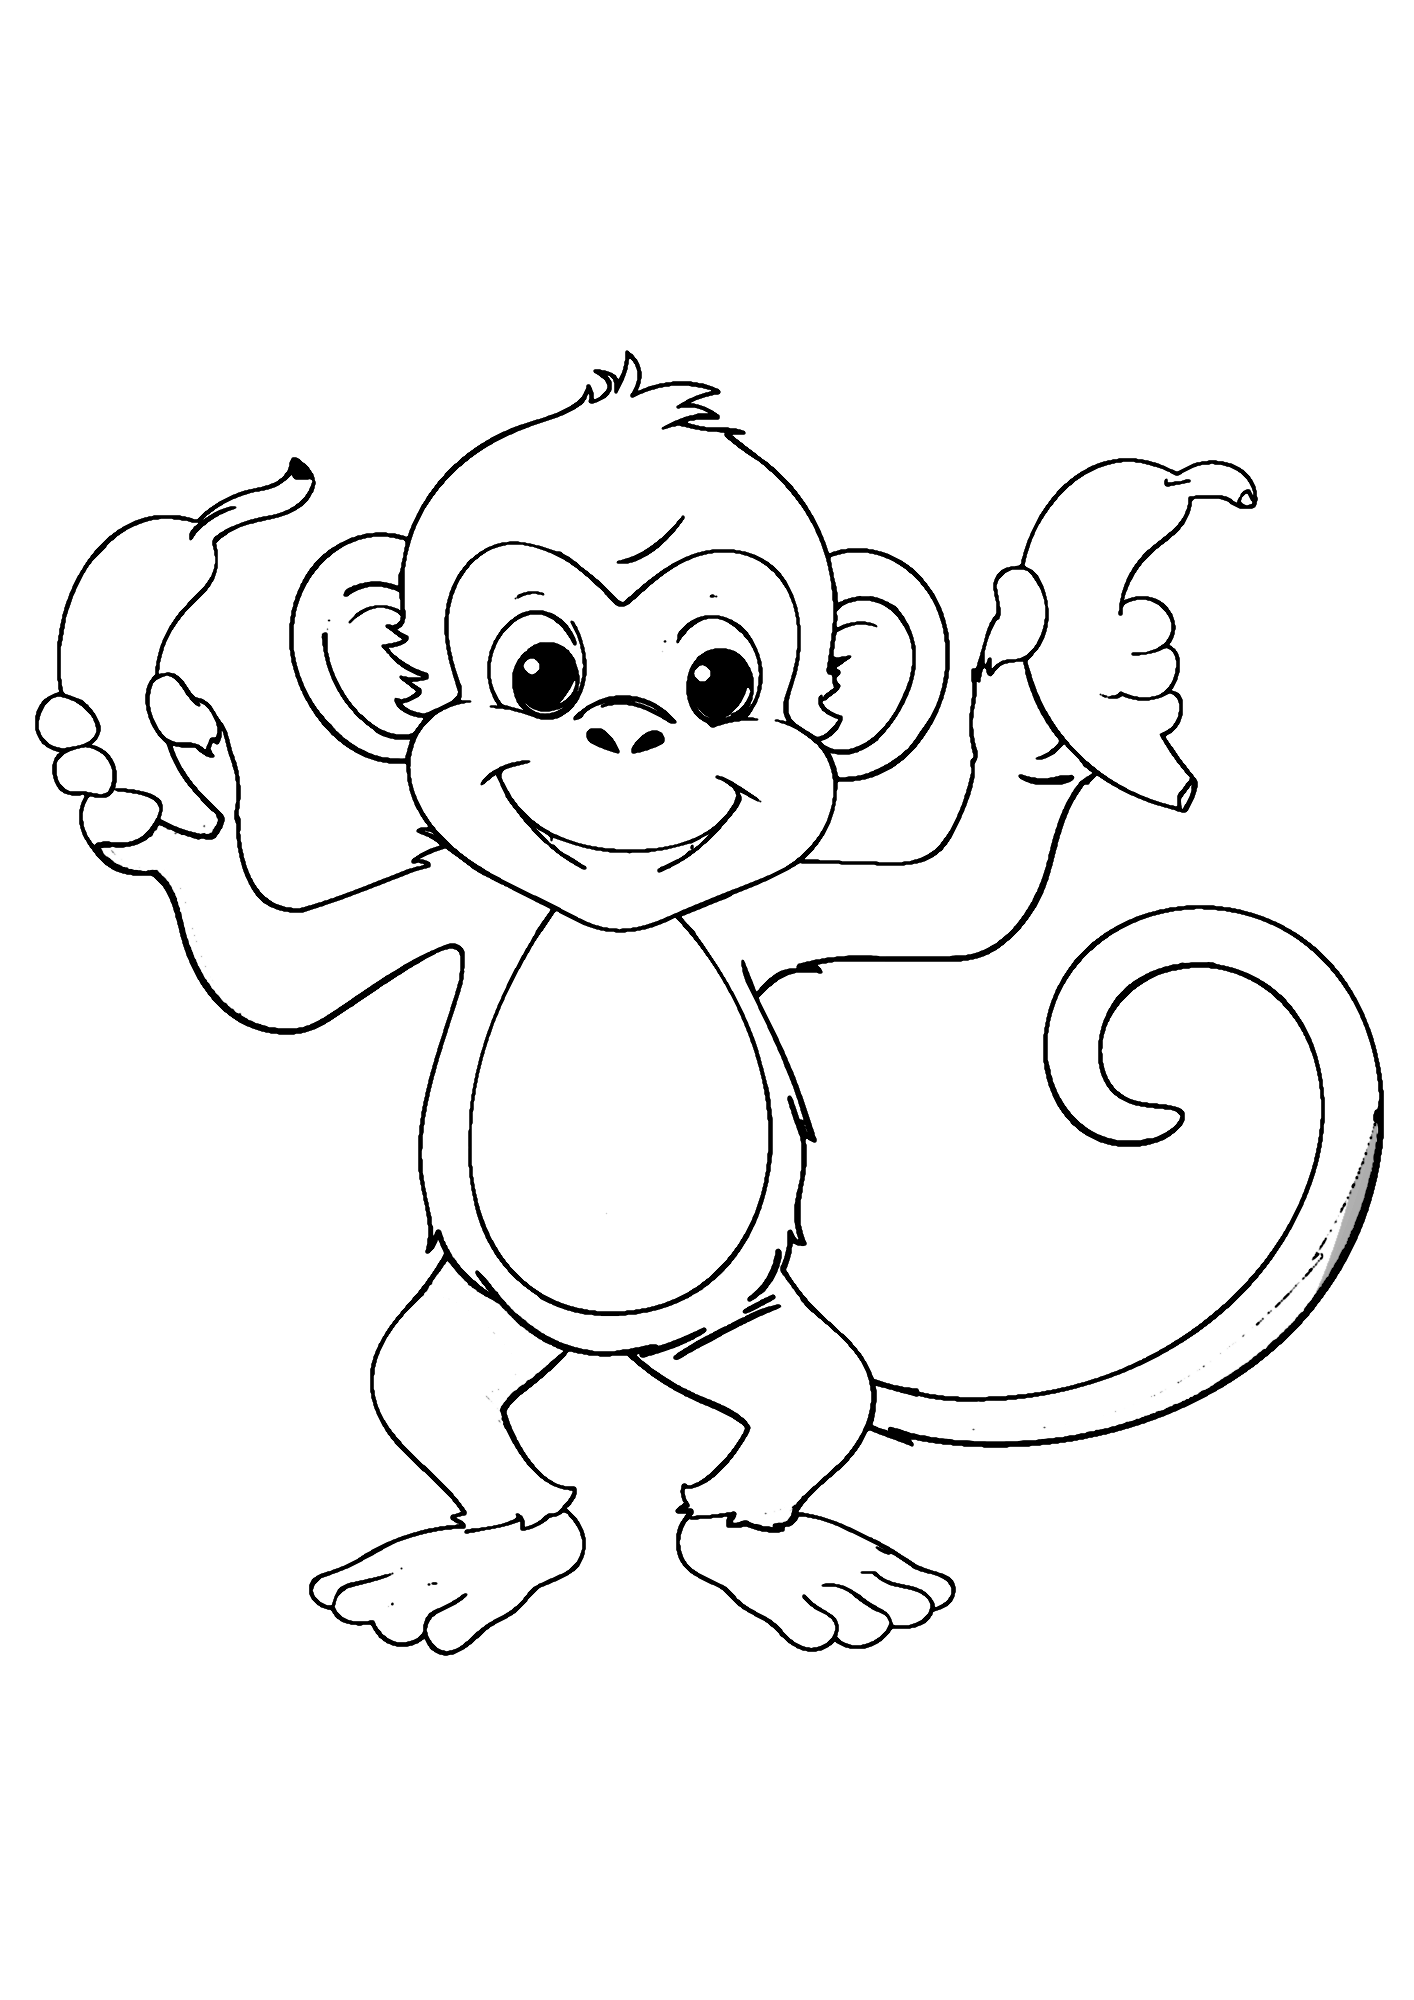 Cartoon Cute Monkey Holding A Banana Coloring Pages